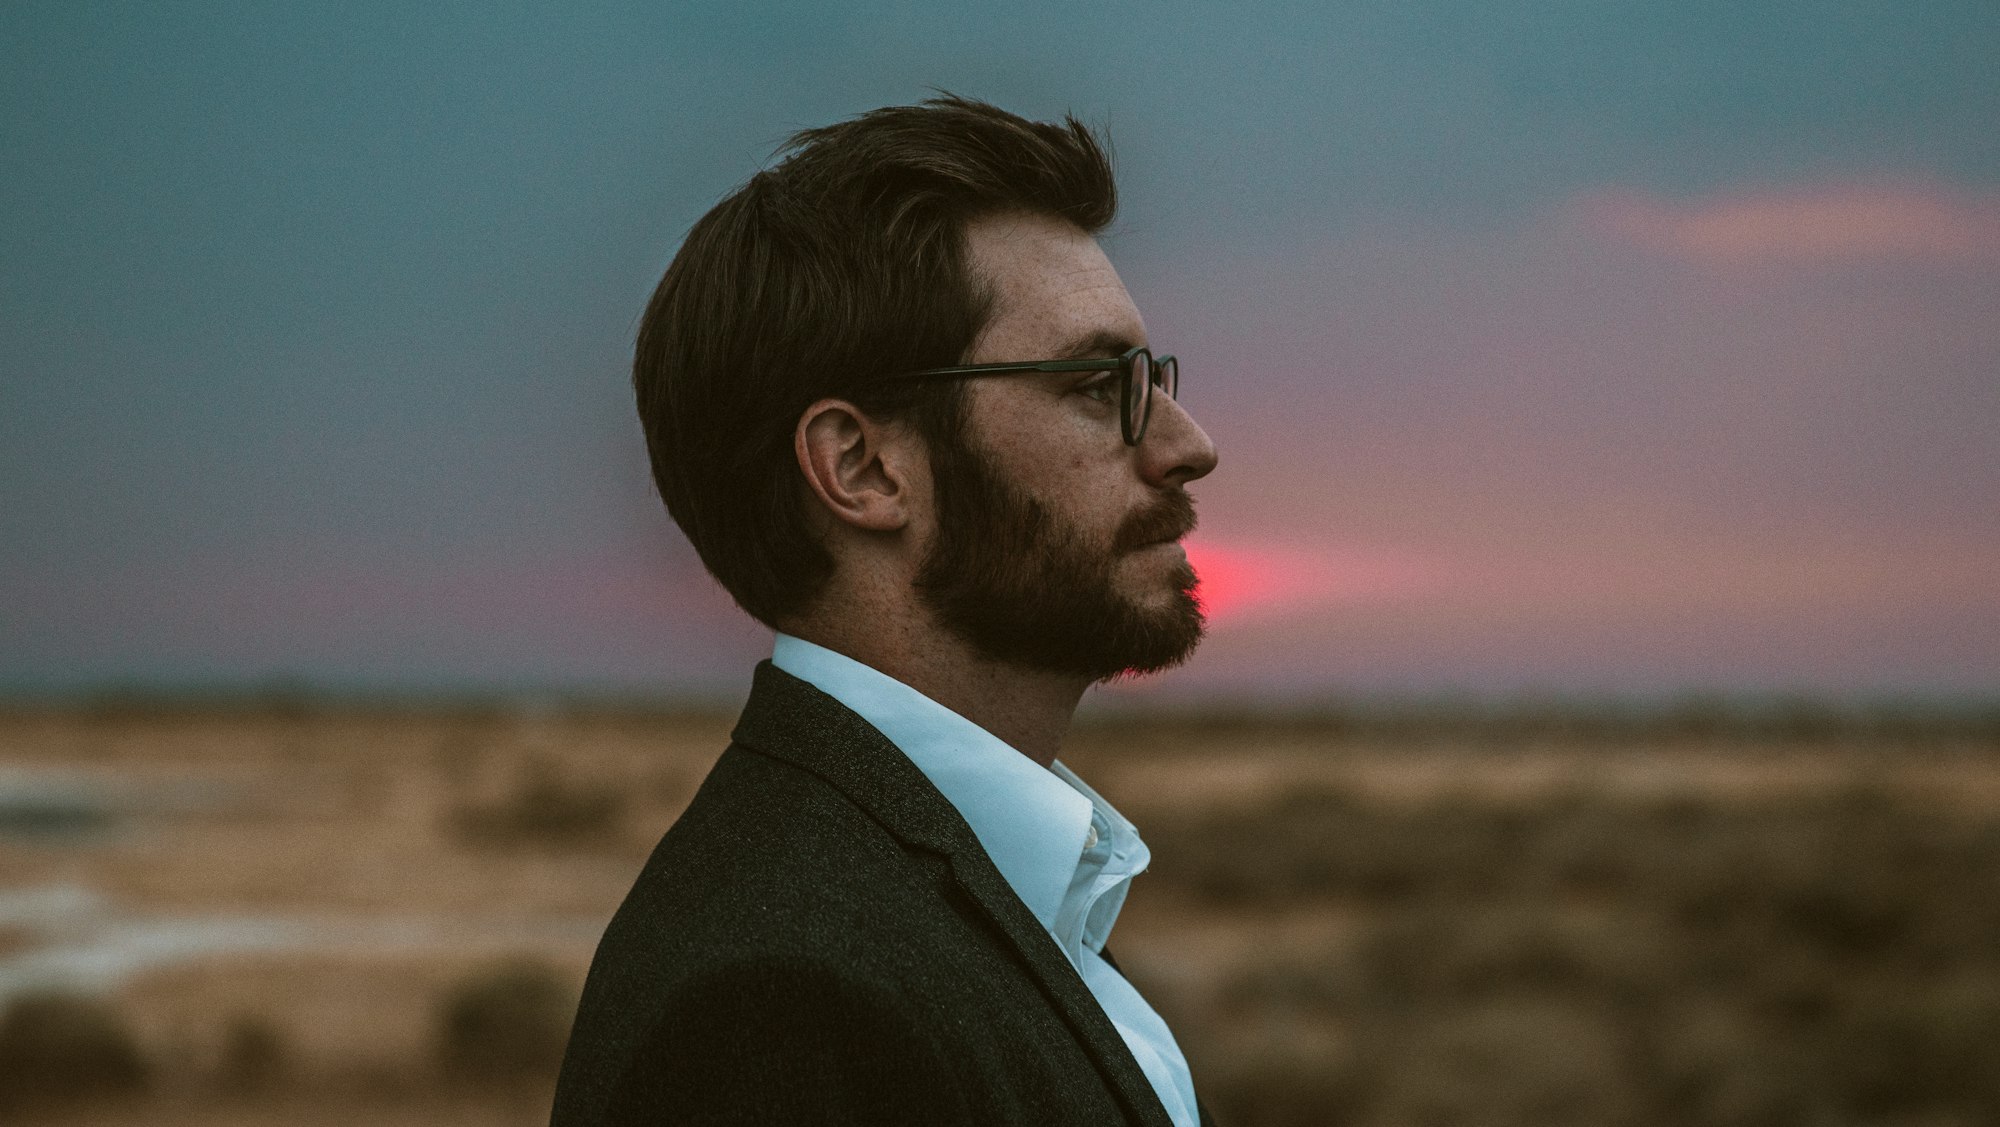 Man stares and he glasses and has beard, nice